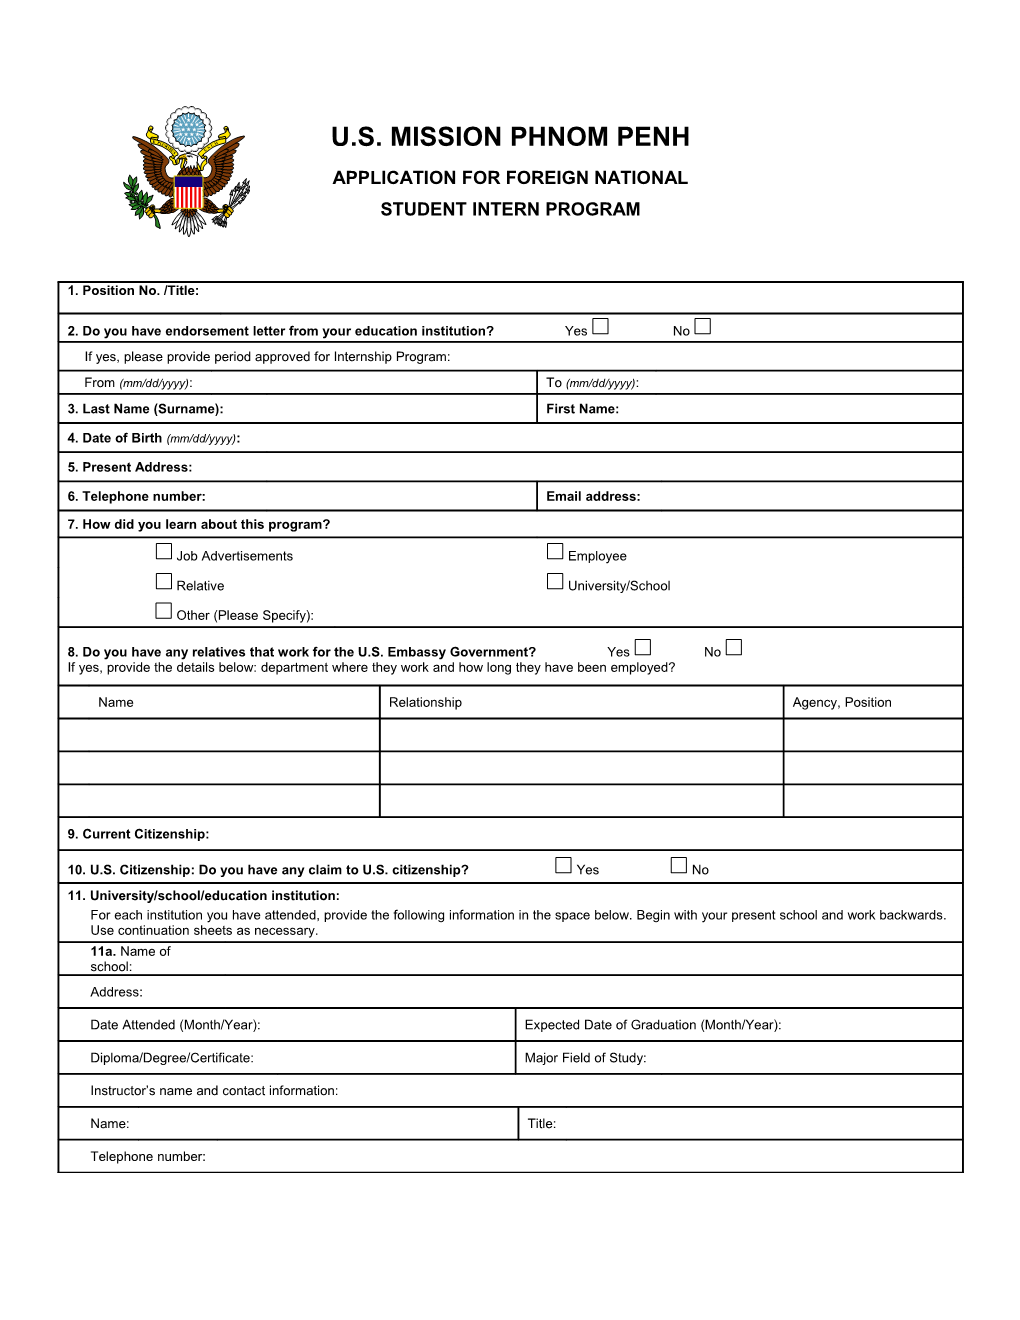 Application for Foreign National